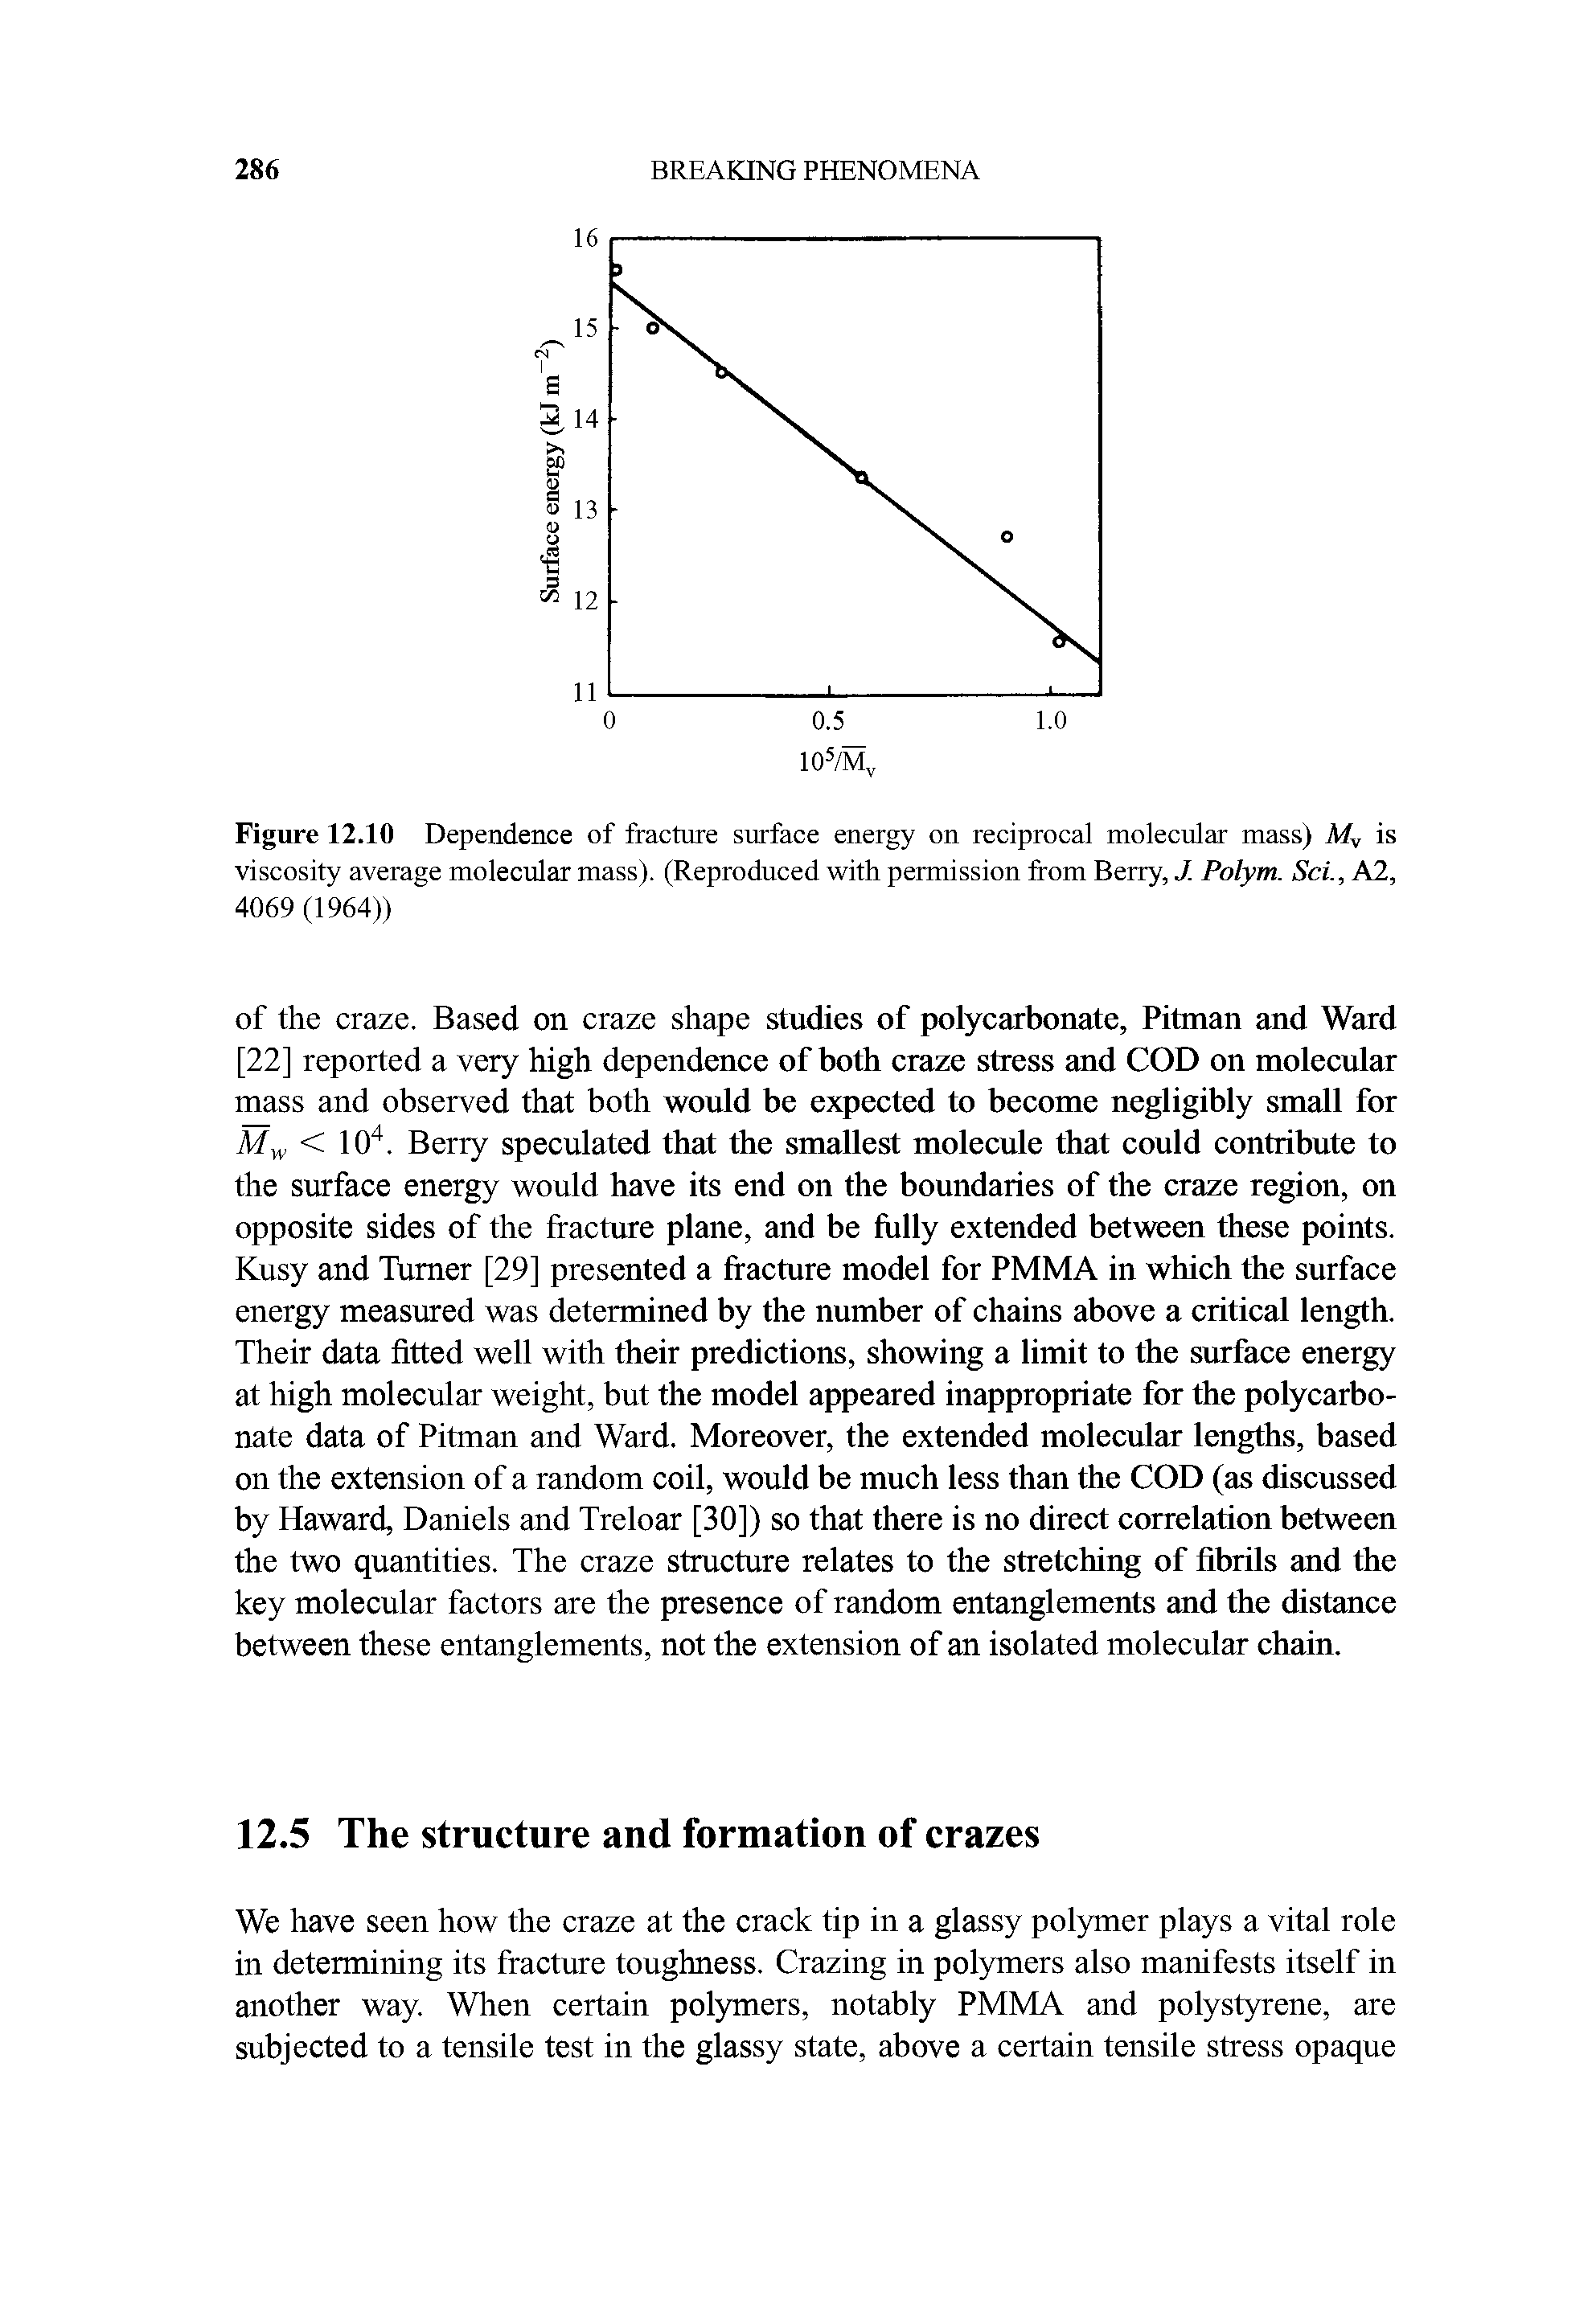 Figure 12.10 Dependence of fracture surface energy on reciprocal molecular mass) A/, is viscosity average molecular mass). (Reproduced with permission from Berry, J. Polym. Sci., A2, 4069 (1964))...